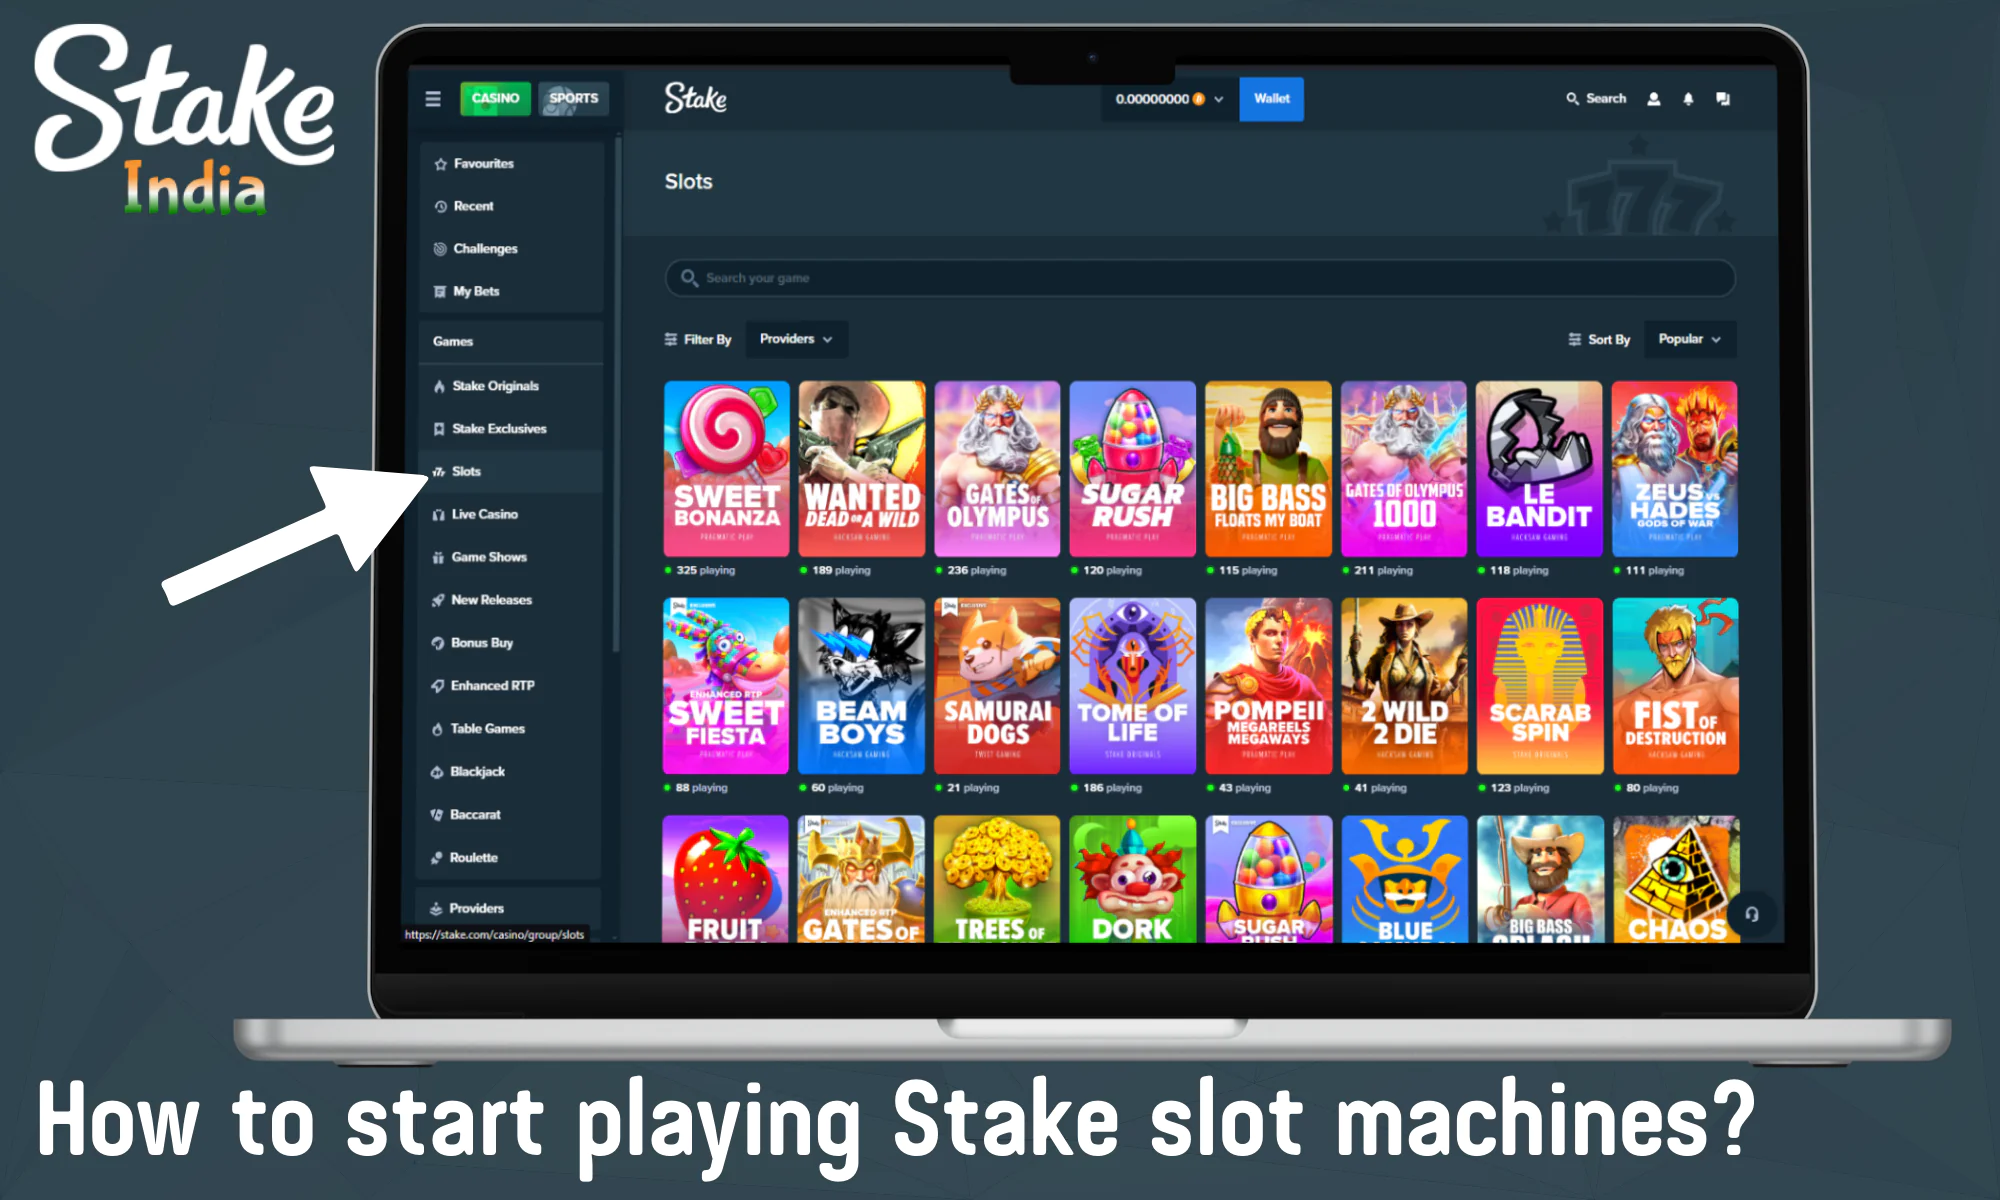 Step by step how to start playing slot machines at Stake